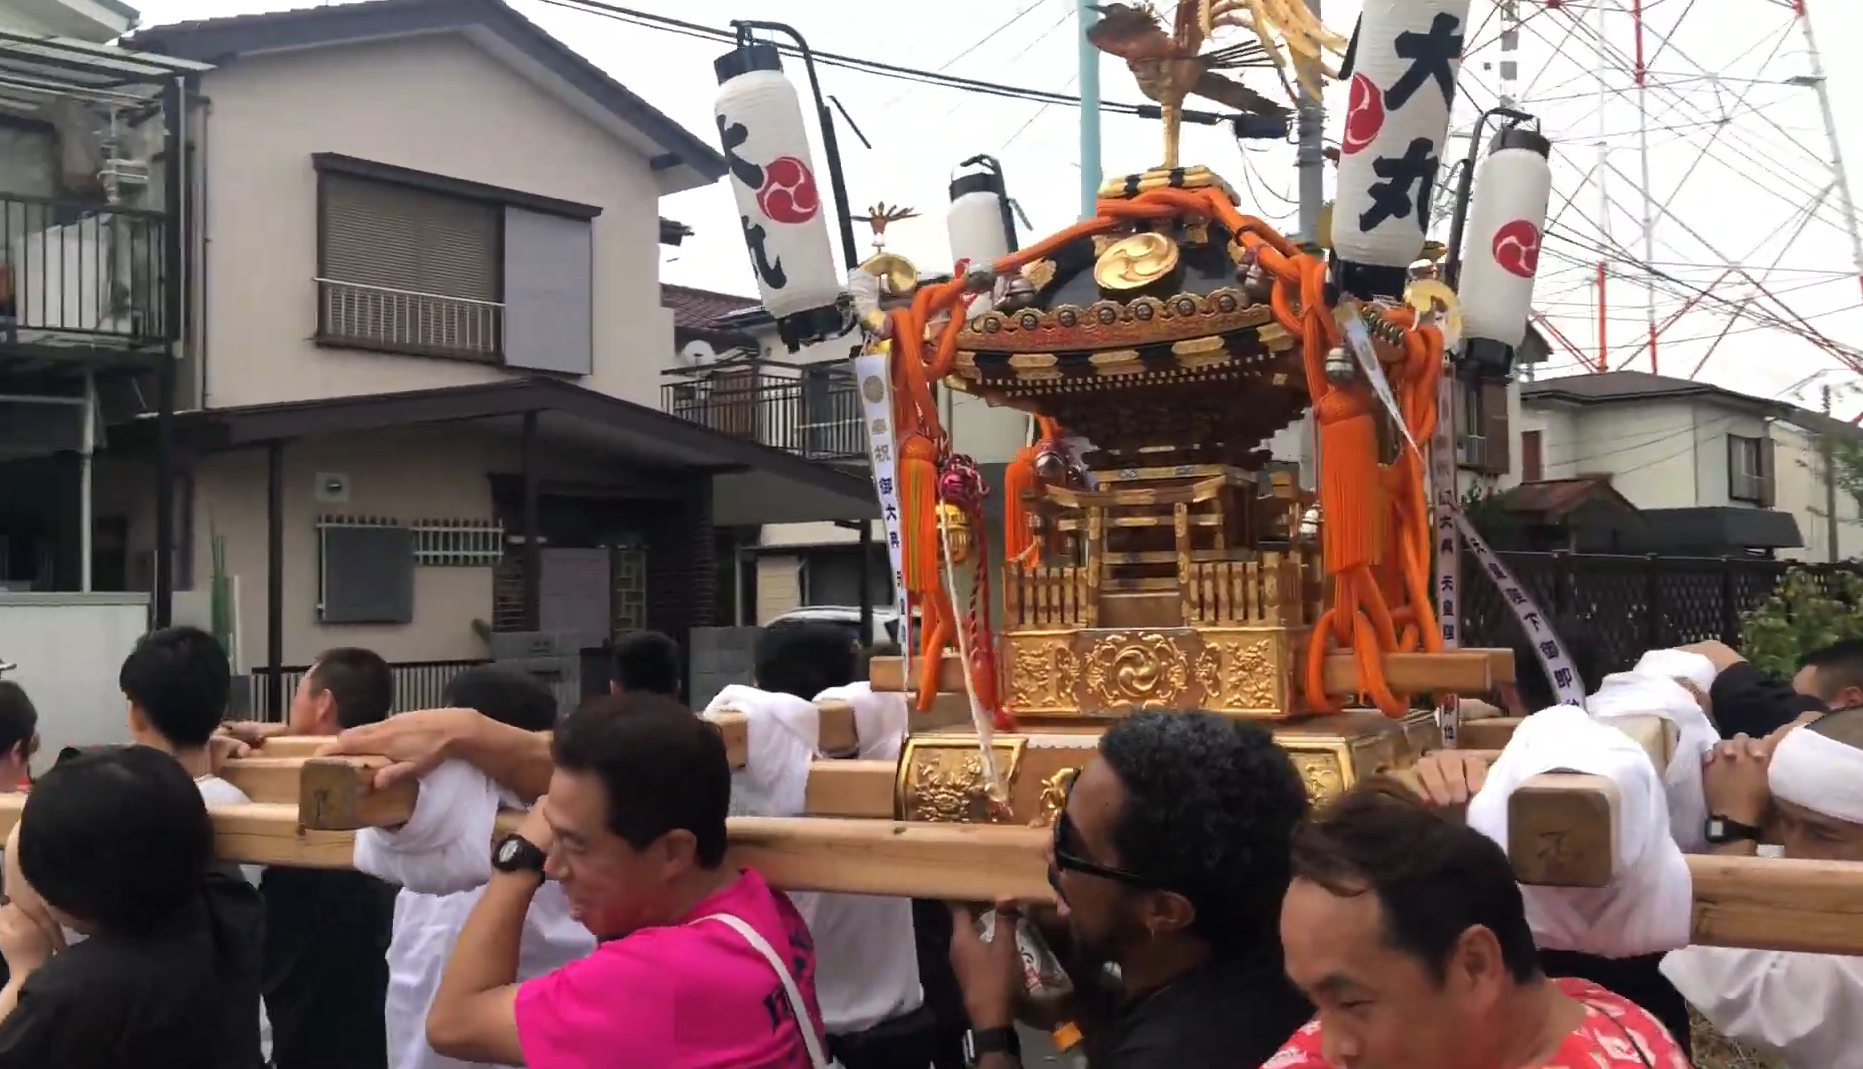 The image depicts a traditional Japanese festival scene where participants are carrying a mikoshi (portable shrine). The mikoshi is elaborately decorated in gold with white lanterns and red accents. Participants are dressed in traditional festival attire, some wearing headbands, while others are in casual clothes. They are lifting the mikoshi on their shoulders using two long wooden beams. In the background, there are residential buildings and power lines under a cloudy sky.